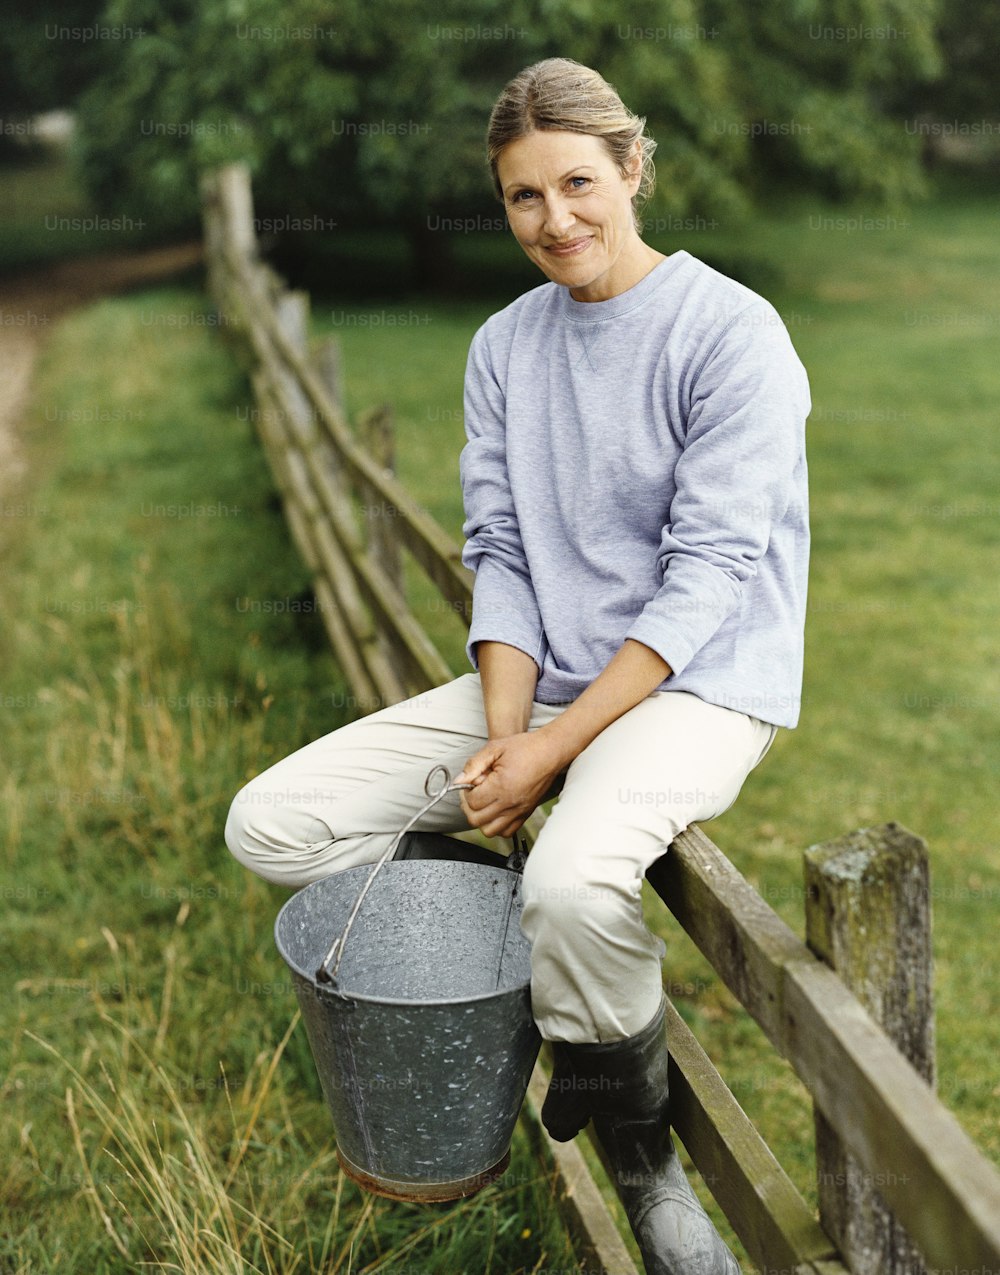 a woman sitting on a wooden fence holding a bucket